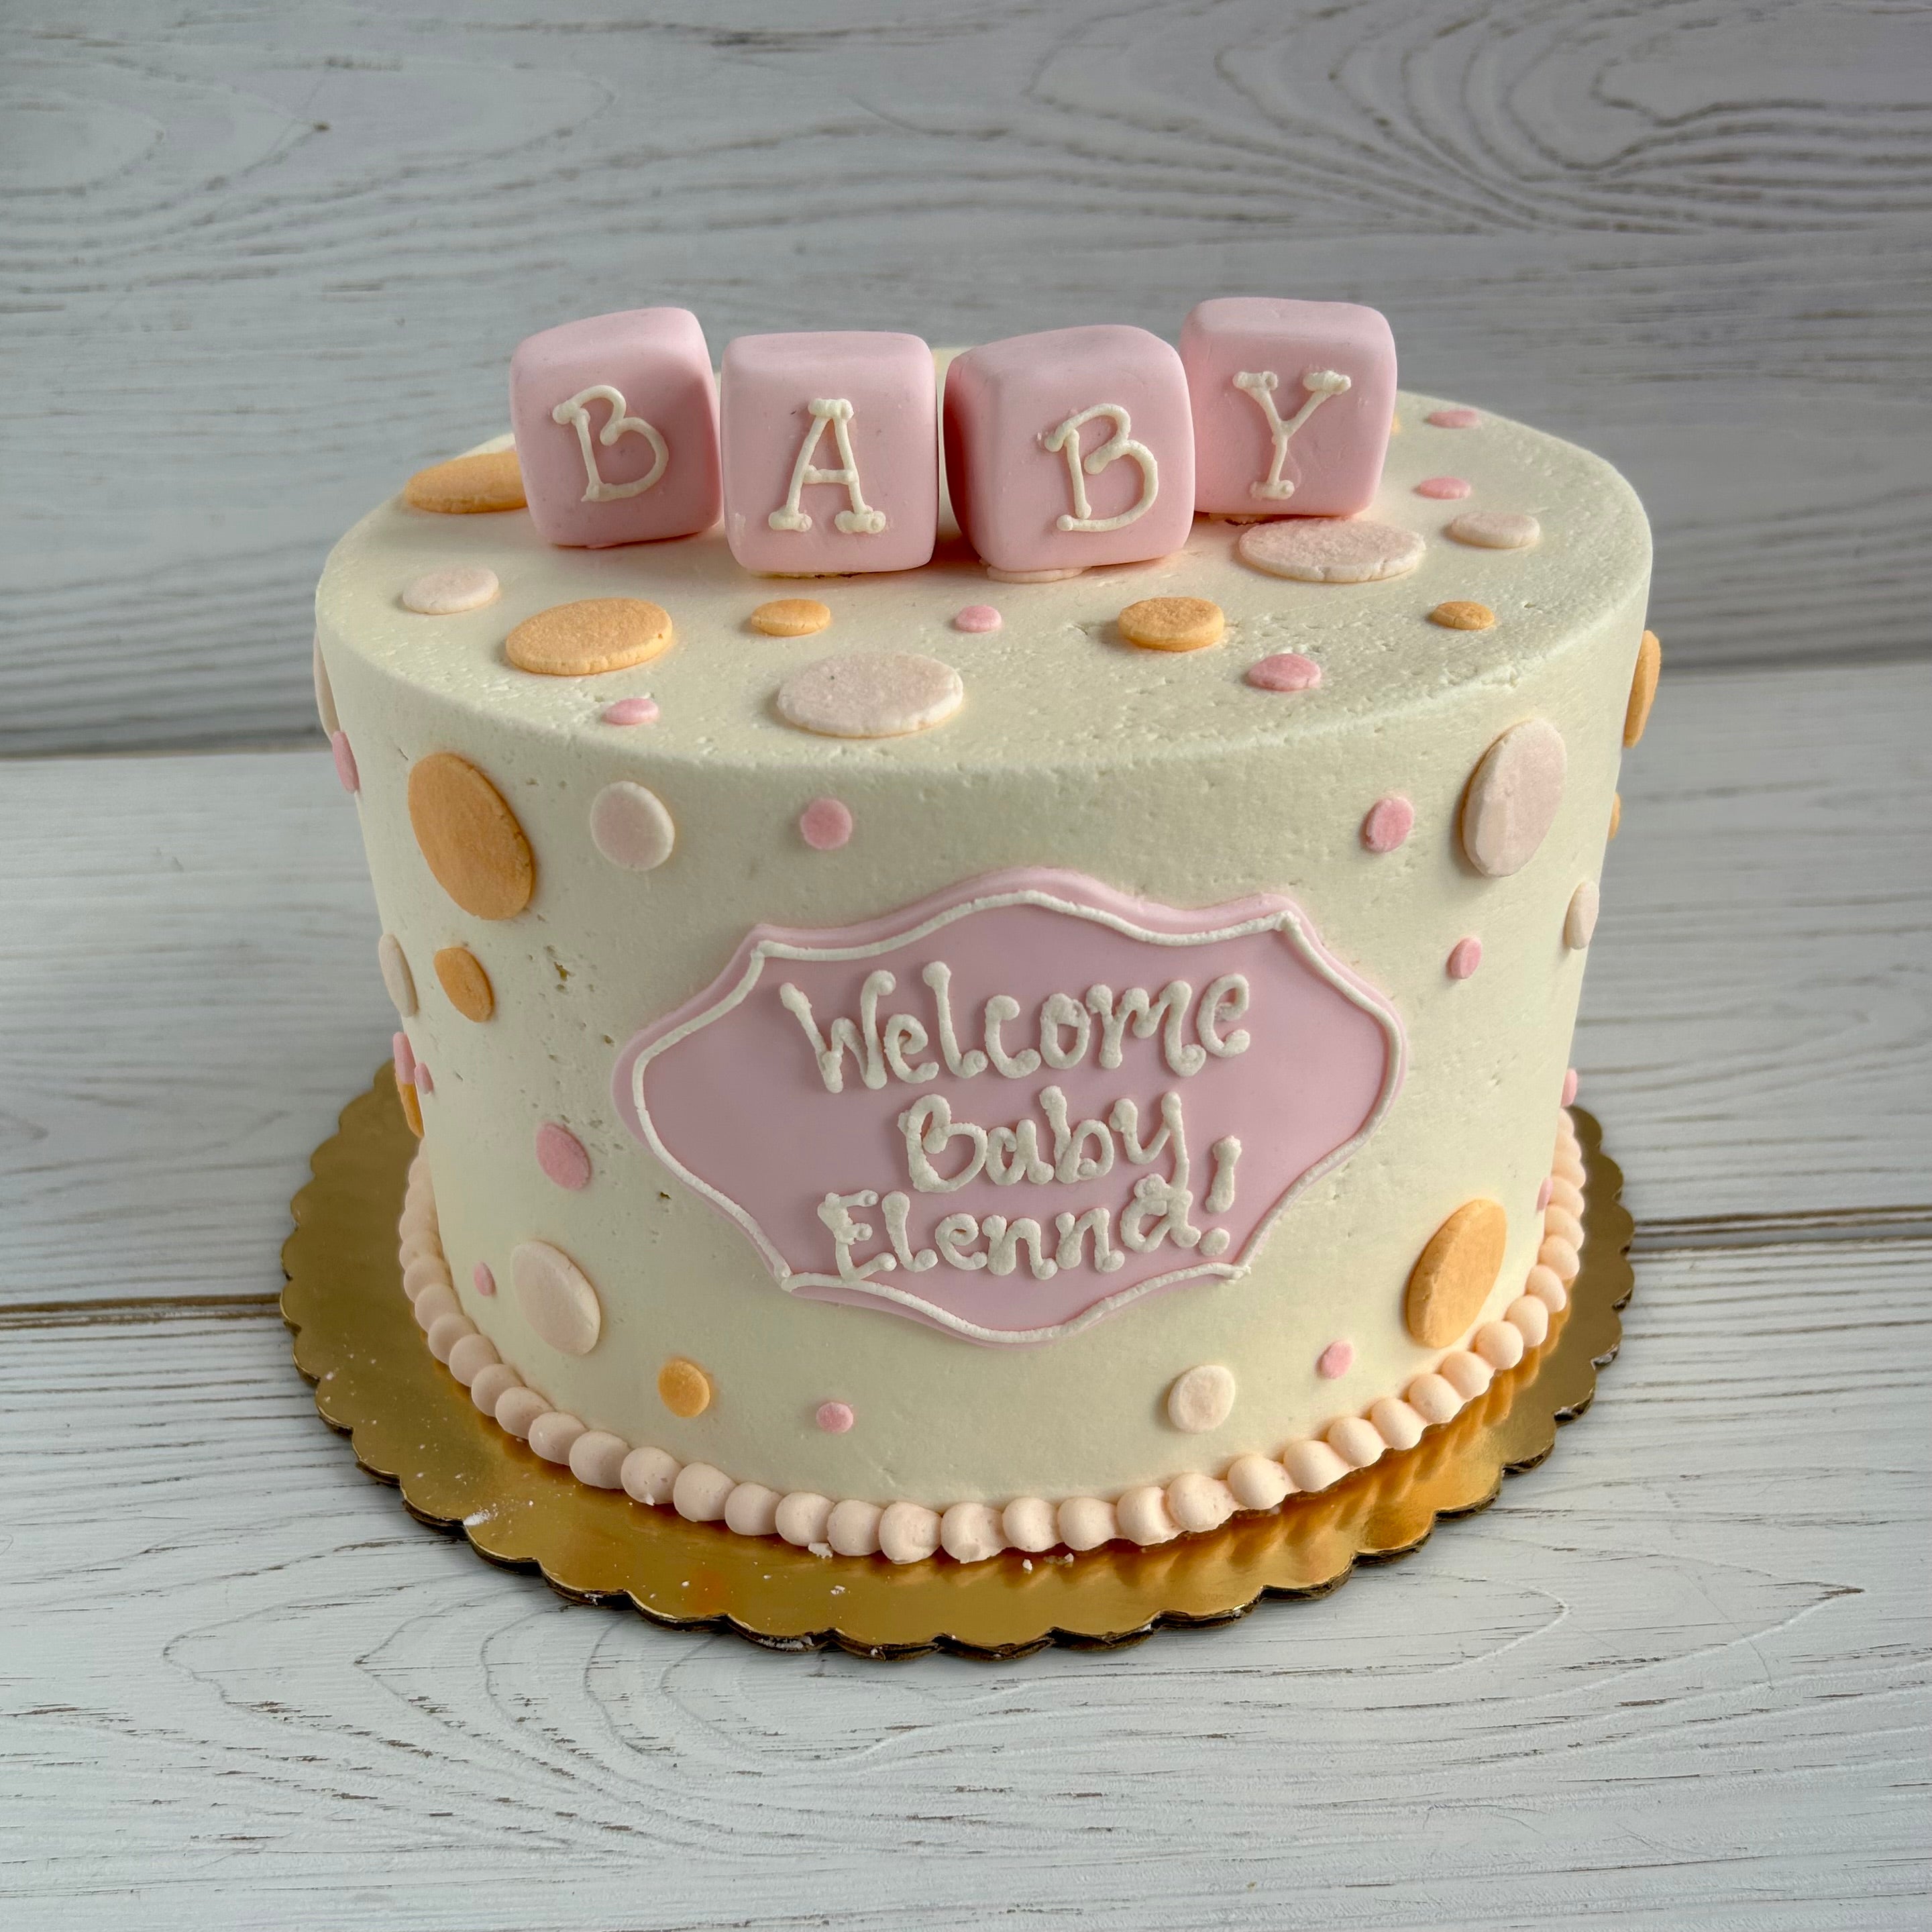 Welcome Baby with Fondant Blocks and Plaque Cake